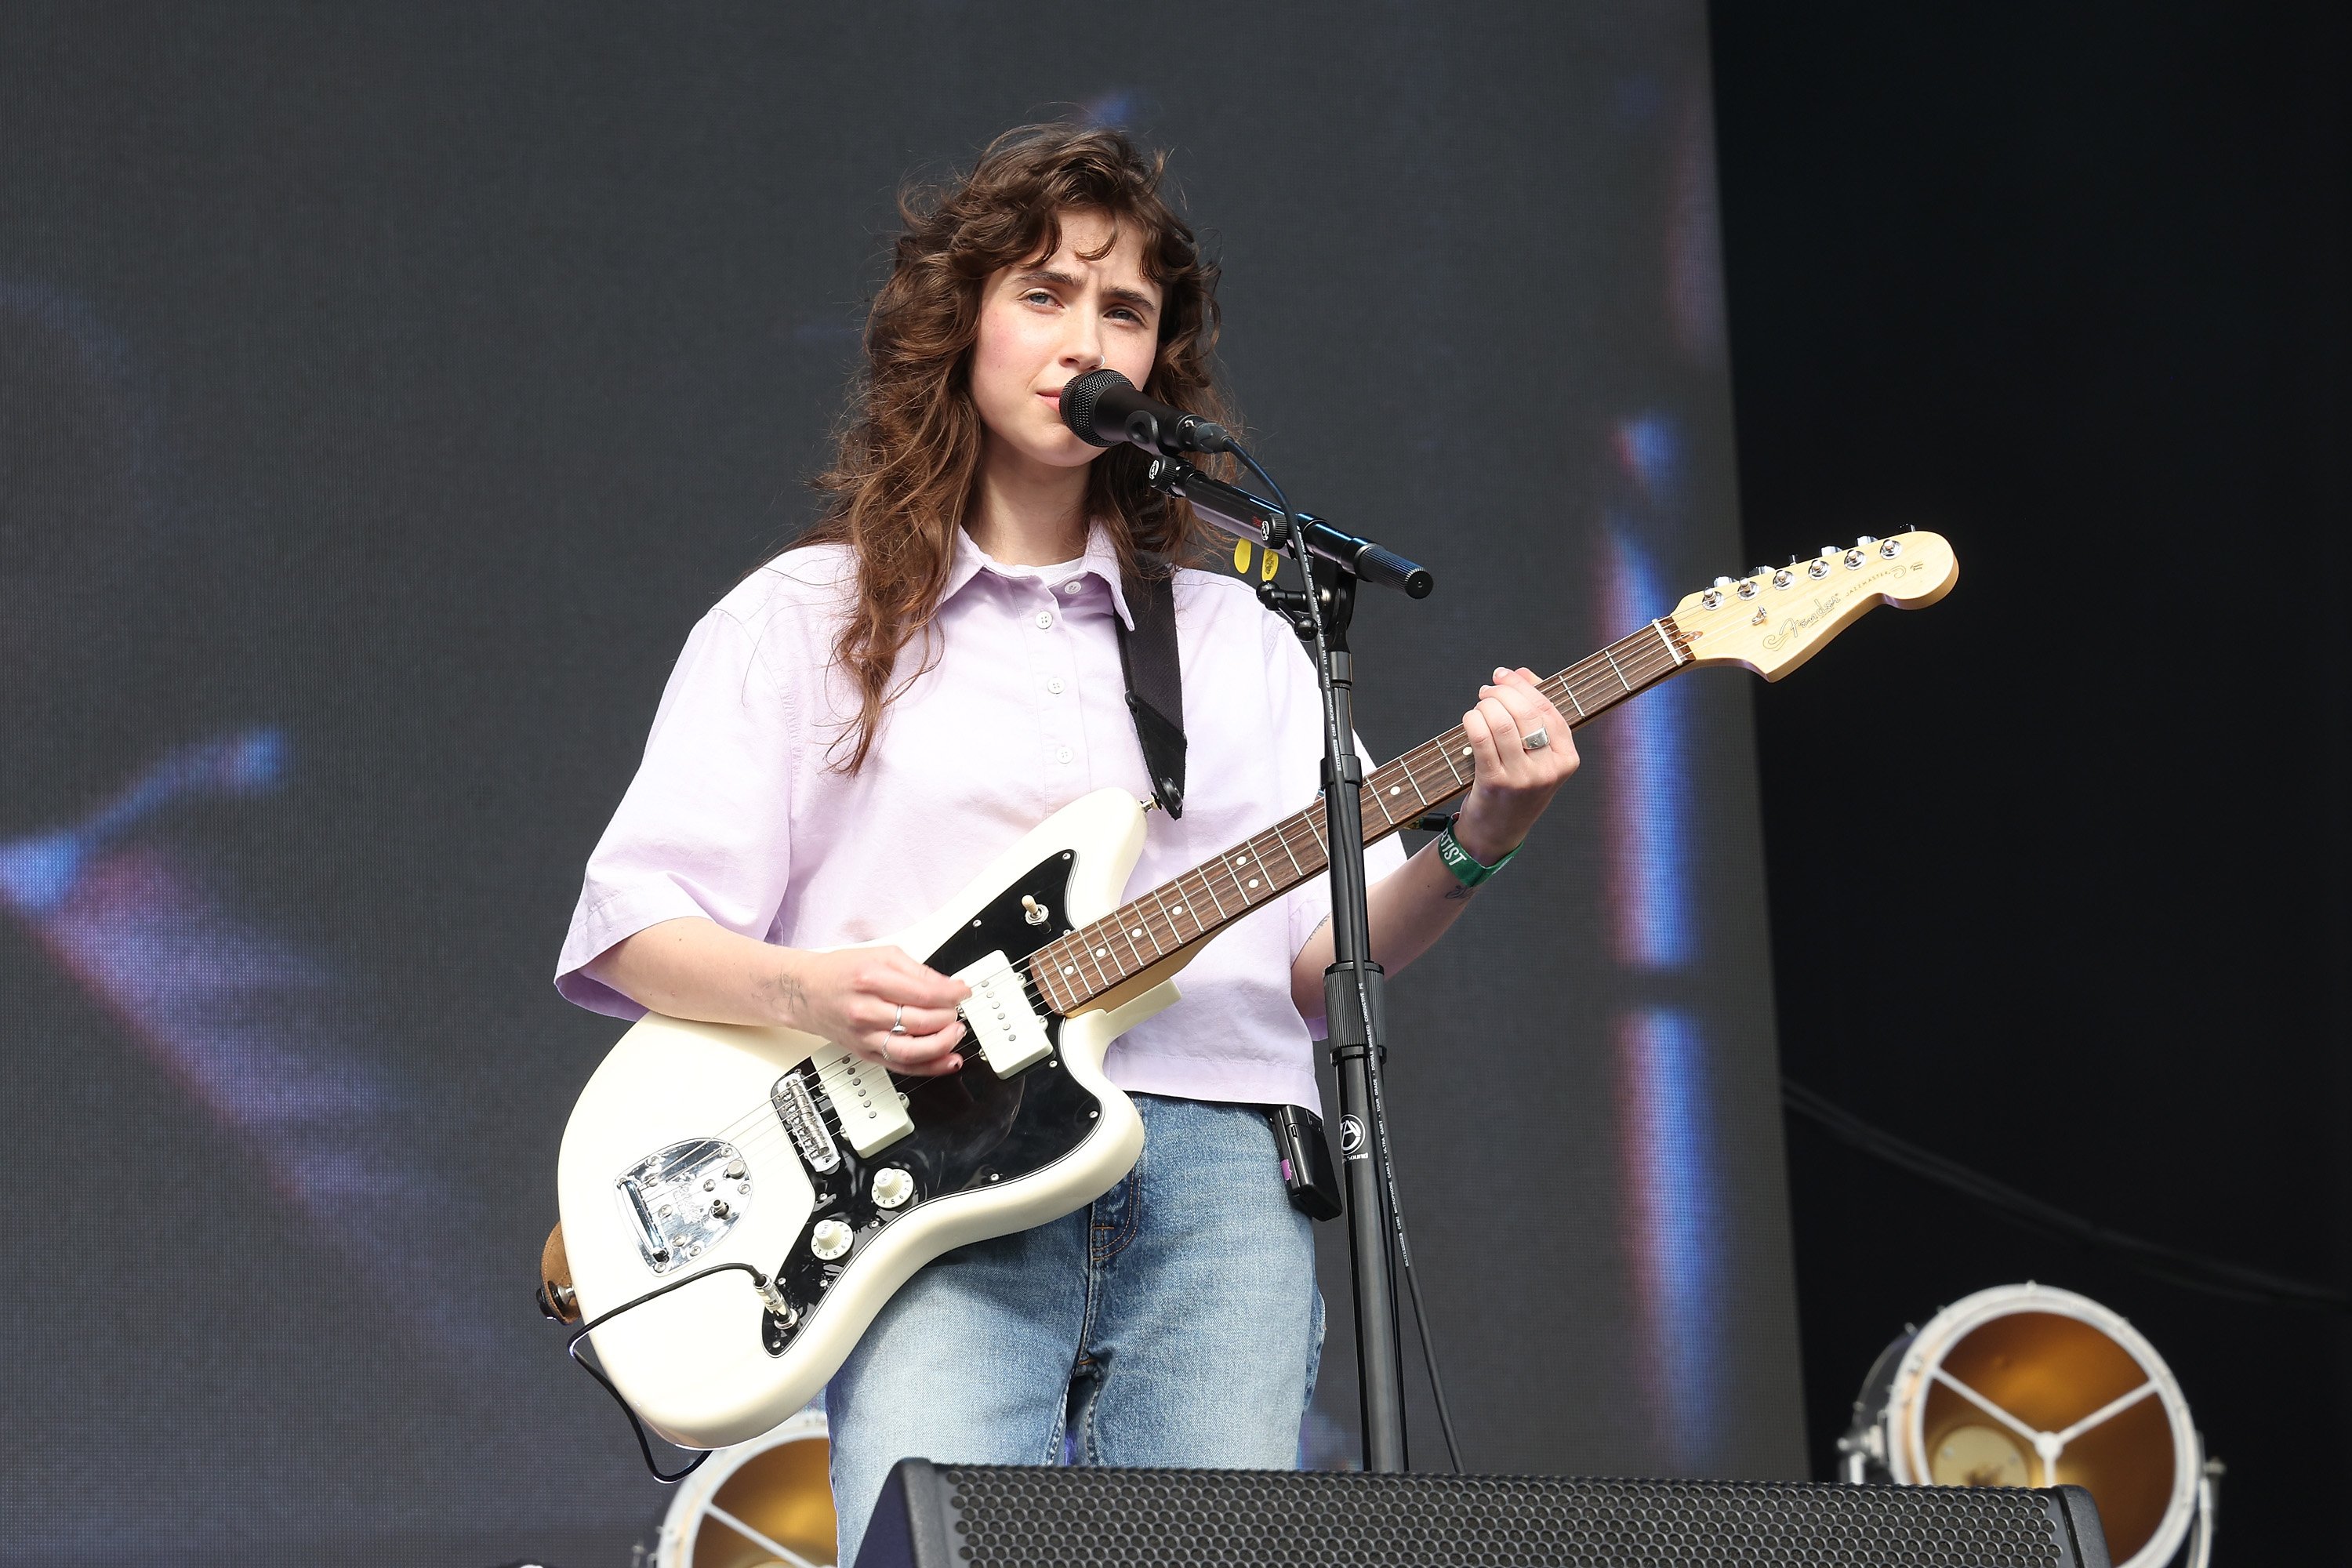 Clairo performs during 2022 Governors Ball Music Festival